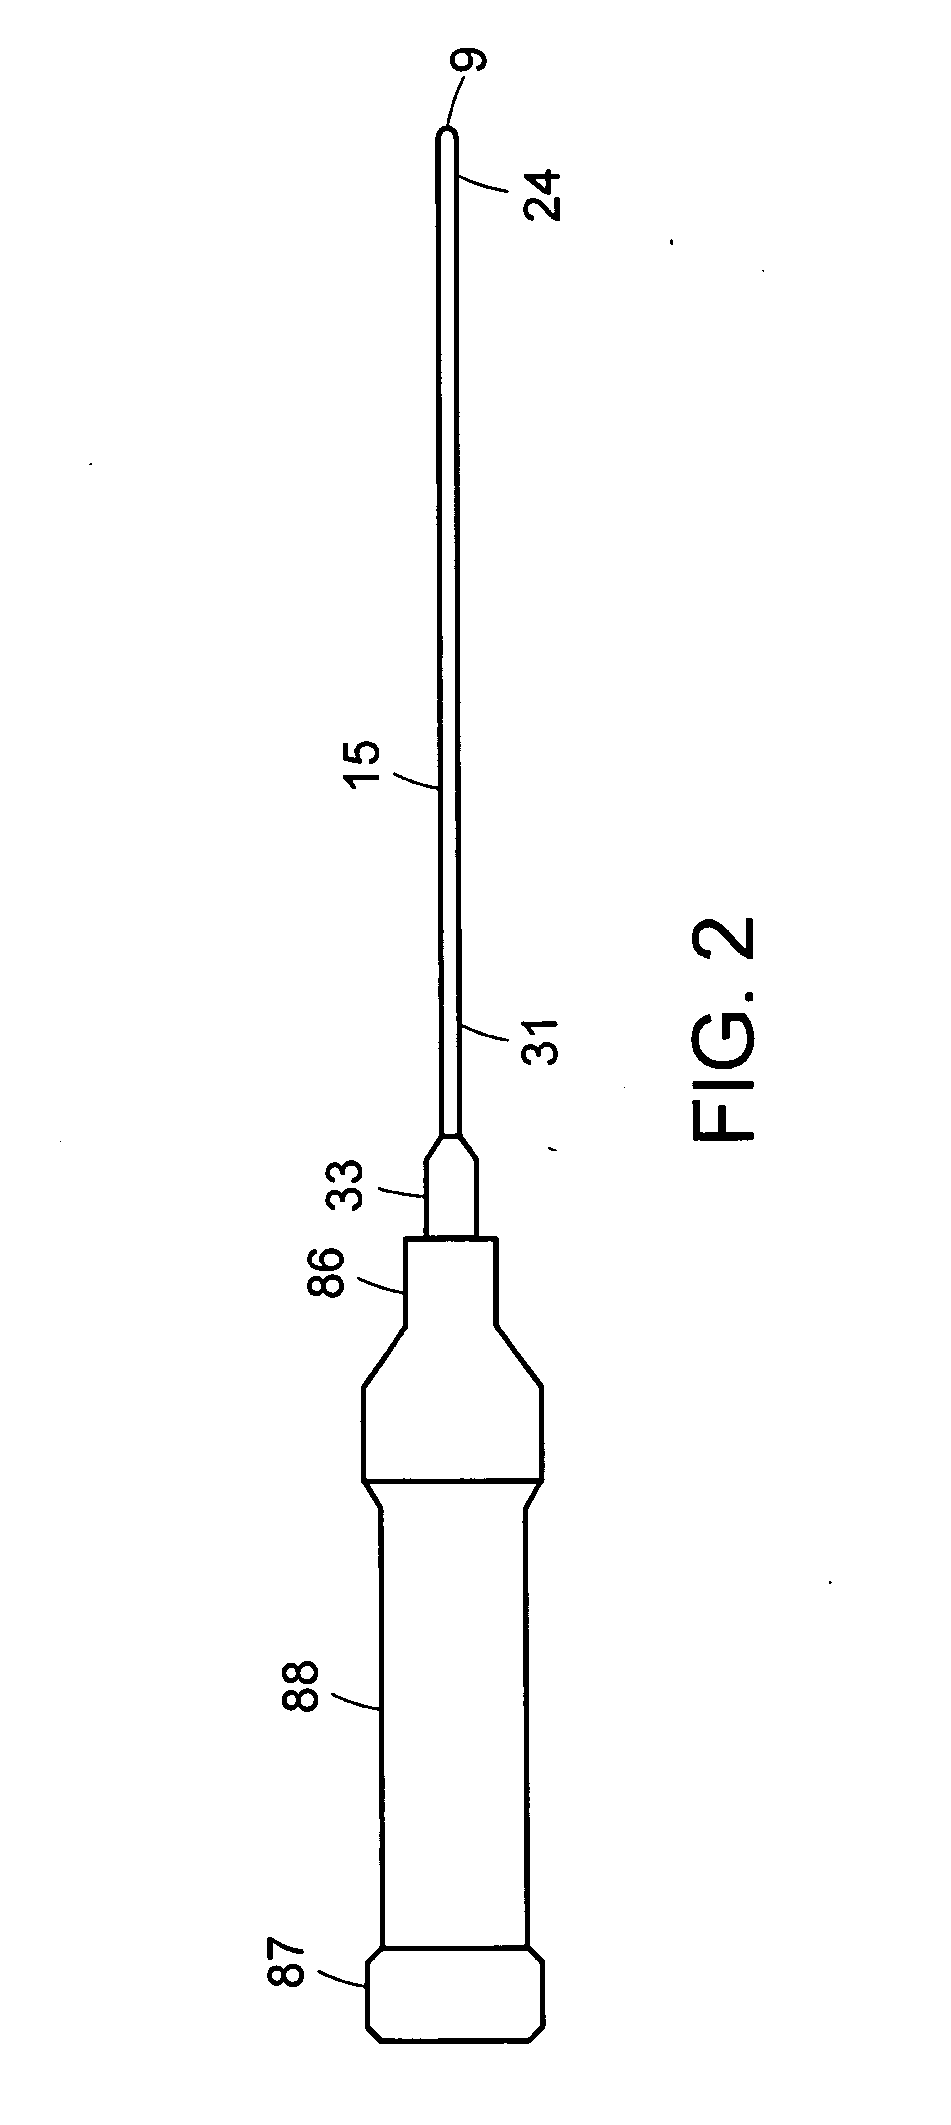 Apparatus and method for an ultrasonic medical device operating in torsional and transverse modes